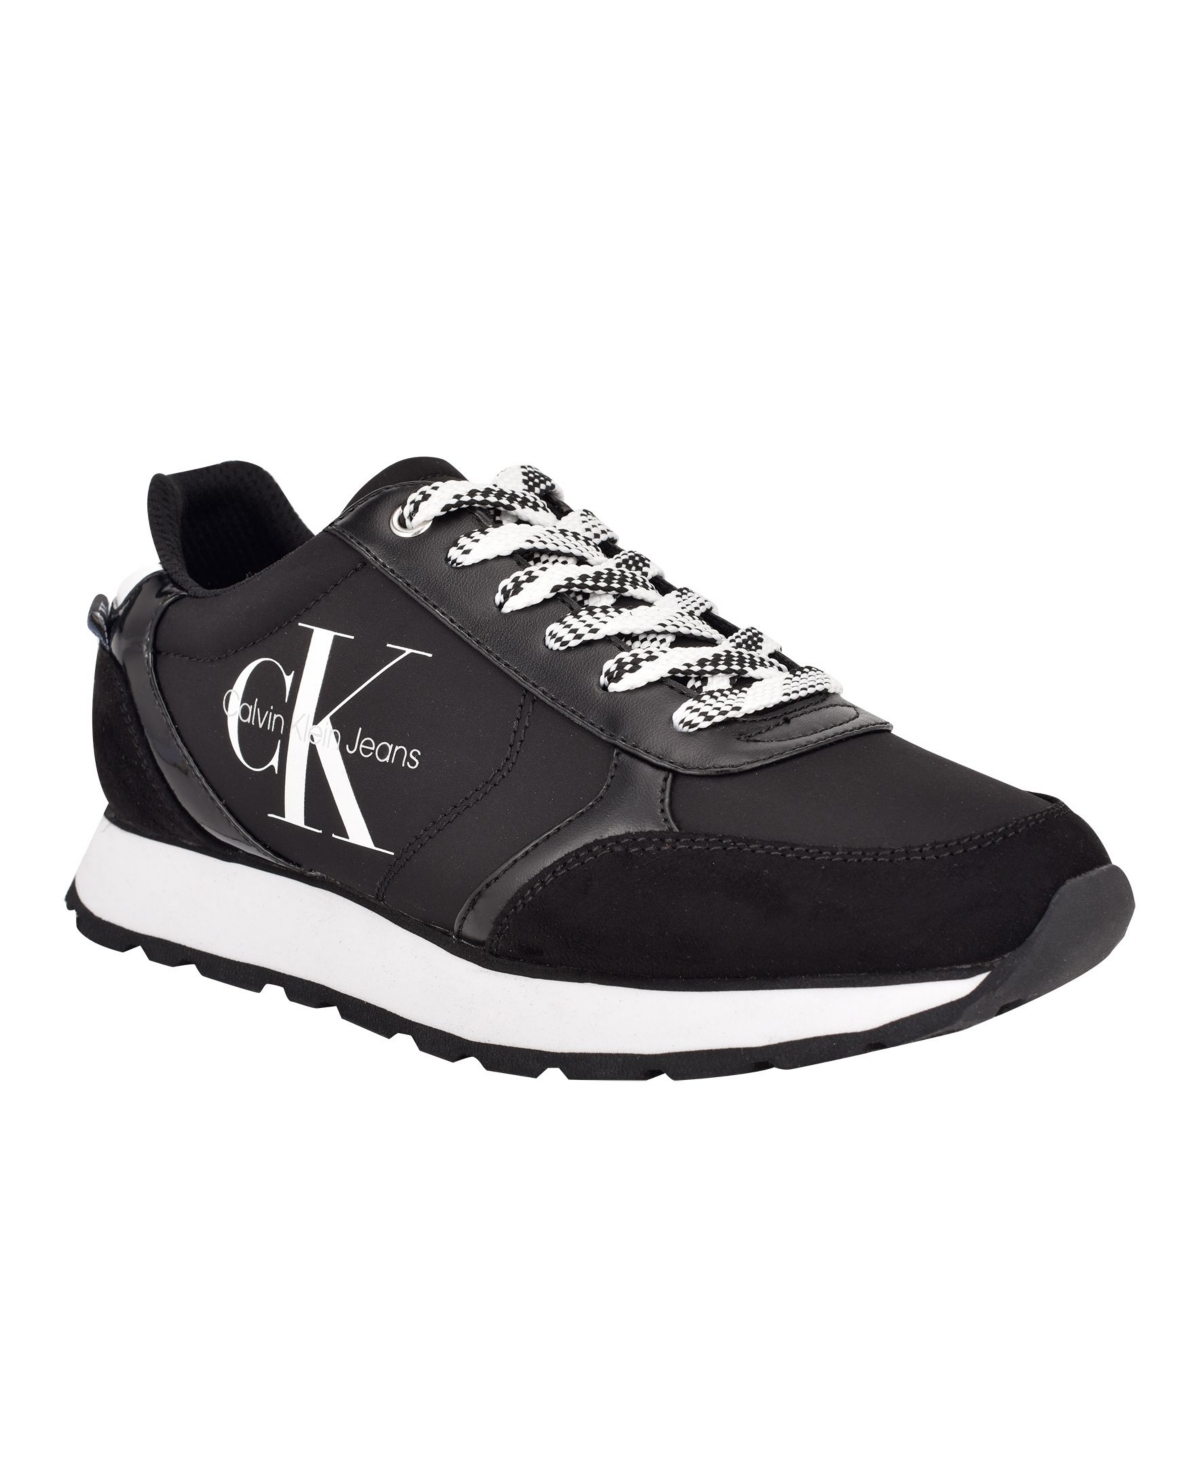 UPC 195182393153 product image for Calvin Klein Jeans Women's Cayle Logo Casual Lace-Up Sneakers Women's Shoes | upcitemdb.com